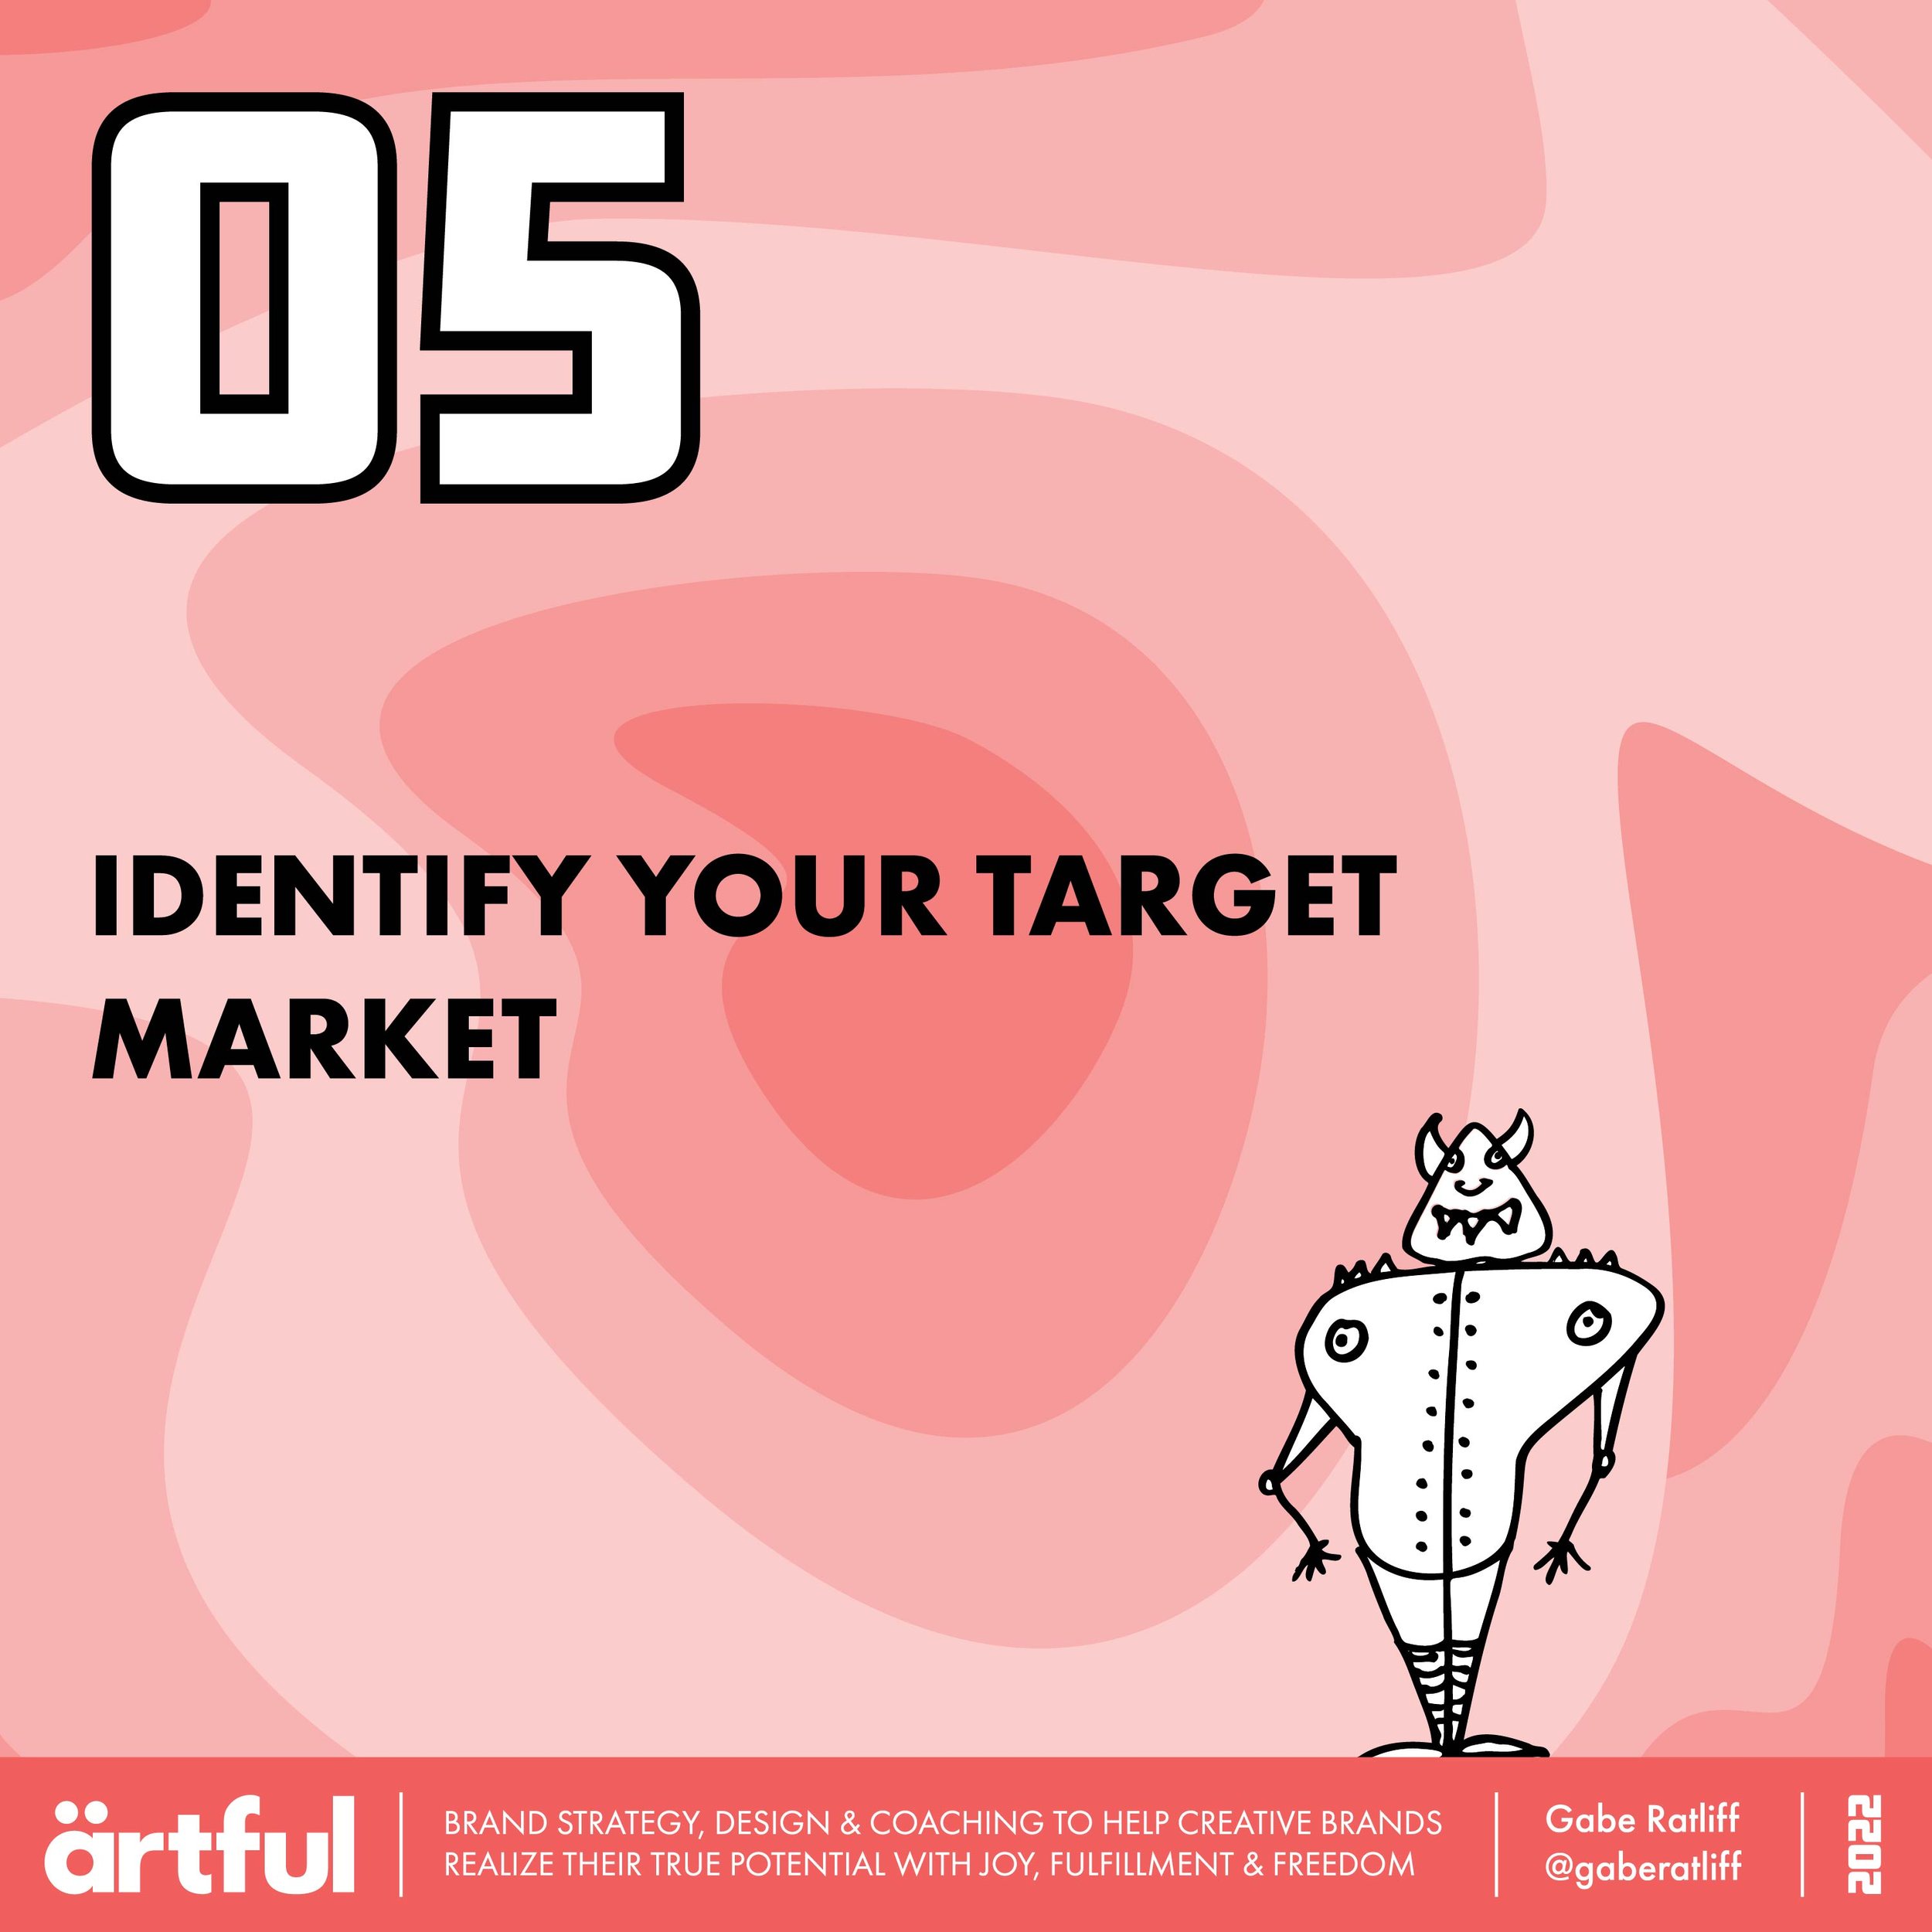 Identify your Target Market